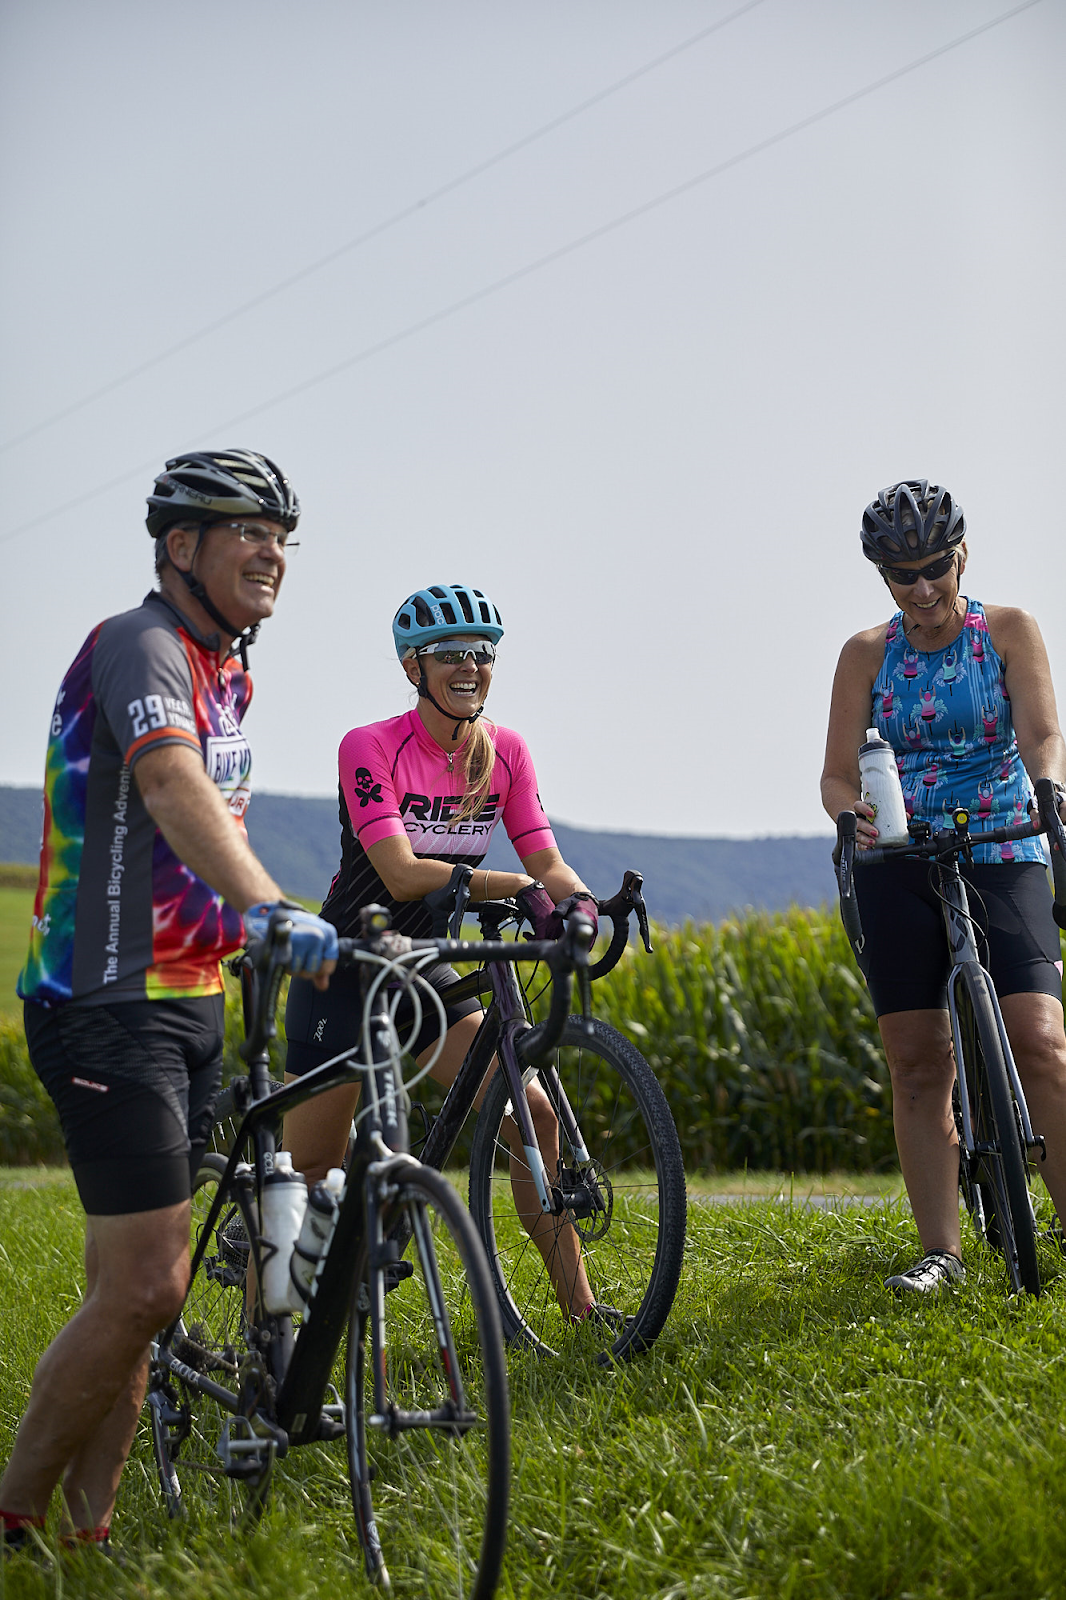 See The Scenery From The Saddle Bike The Shenandoah Valley